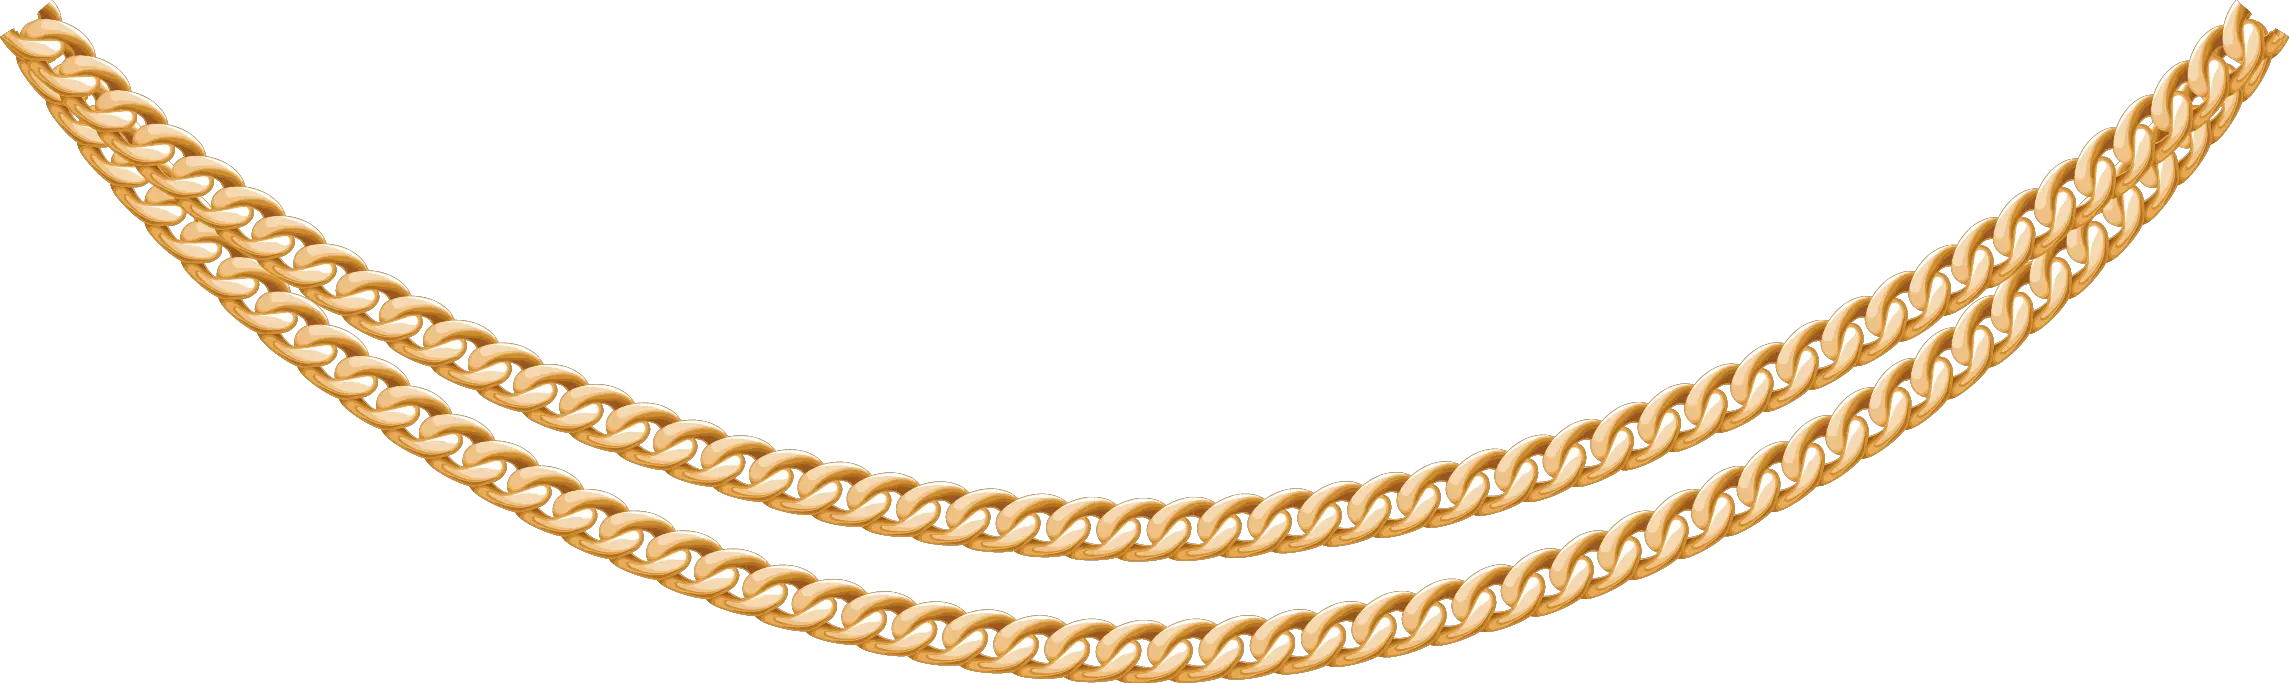 Rusty Chain Png